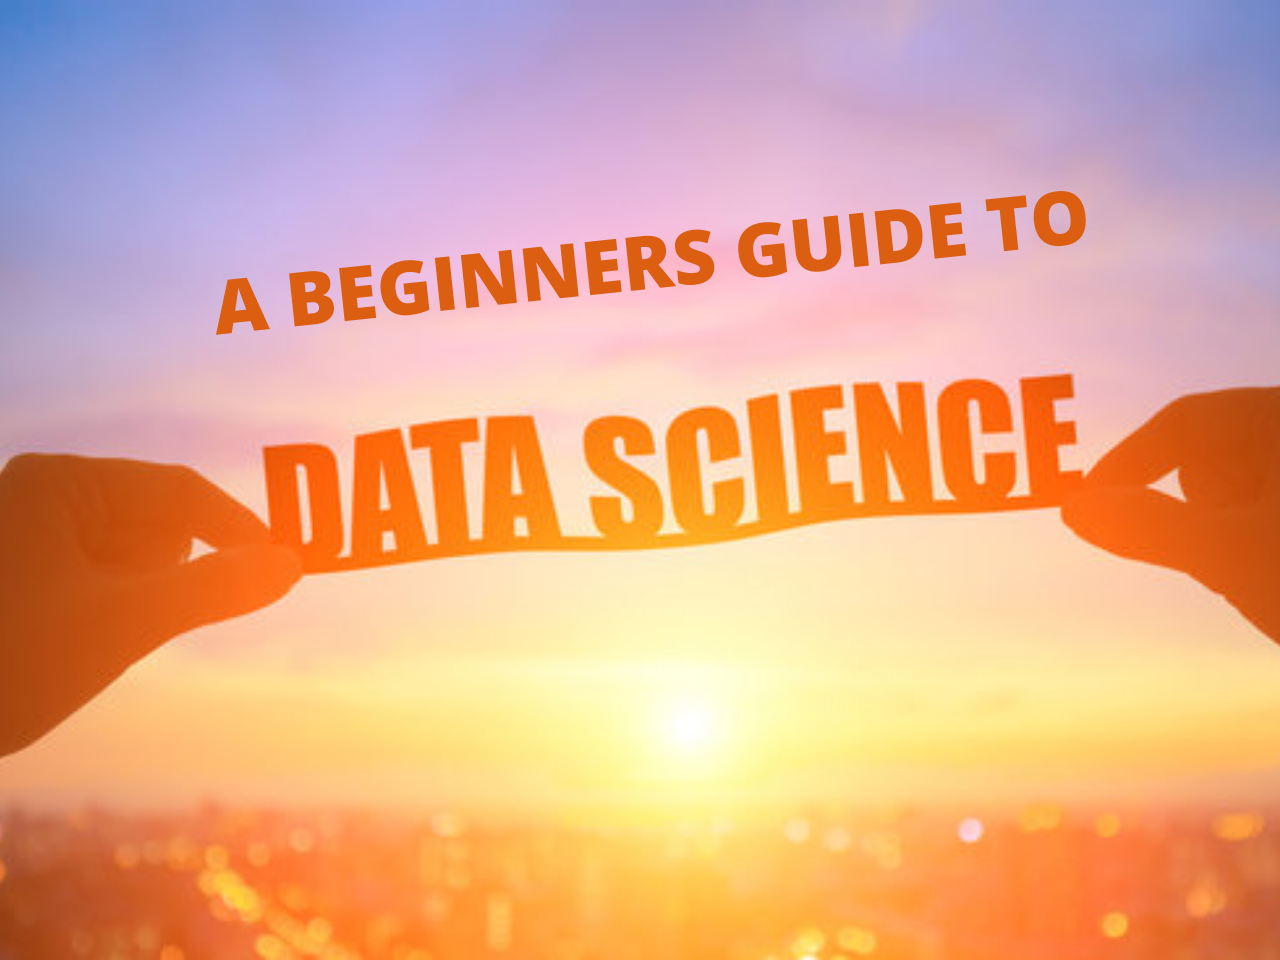 A BEGINNERS GUIDE TO DATA SCIENCE (2).png Data Science Course in hdyerabad by subbu